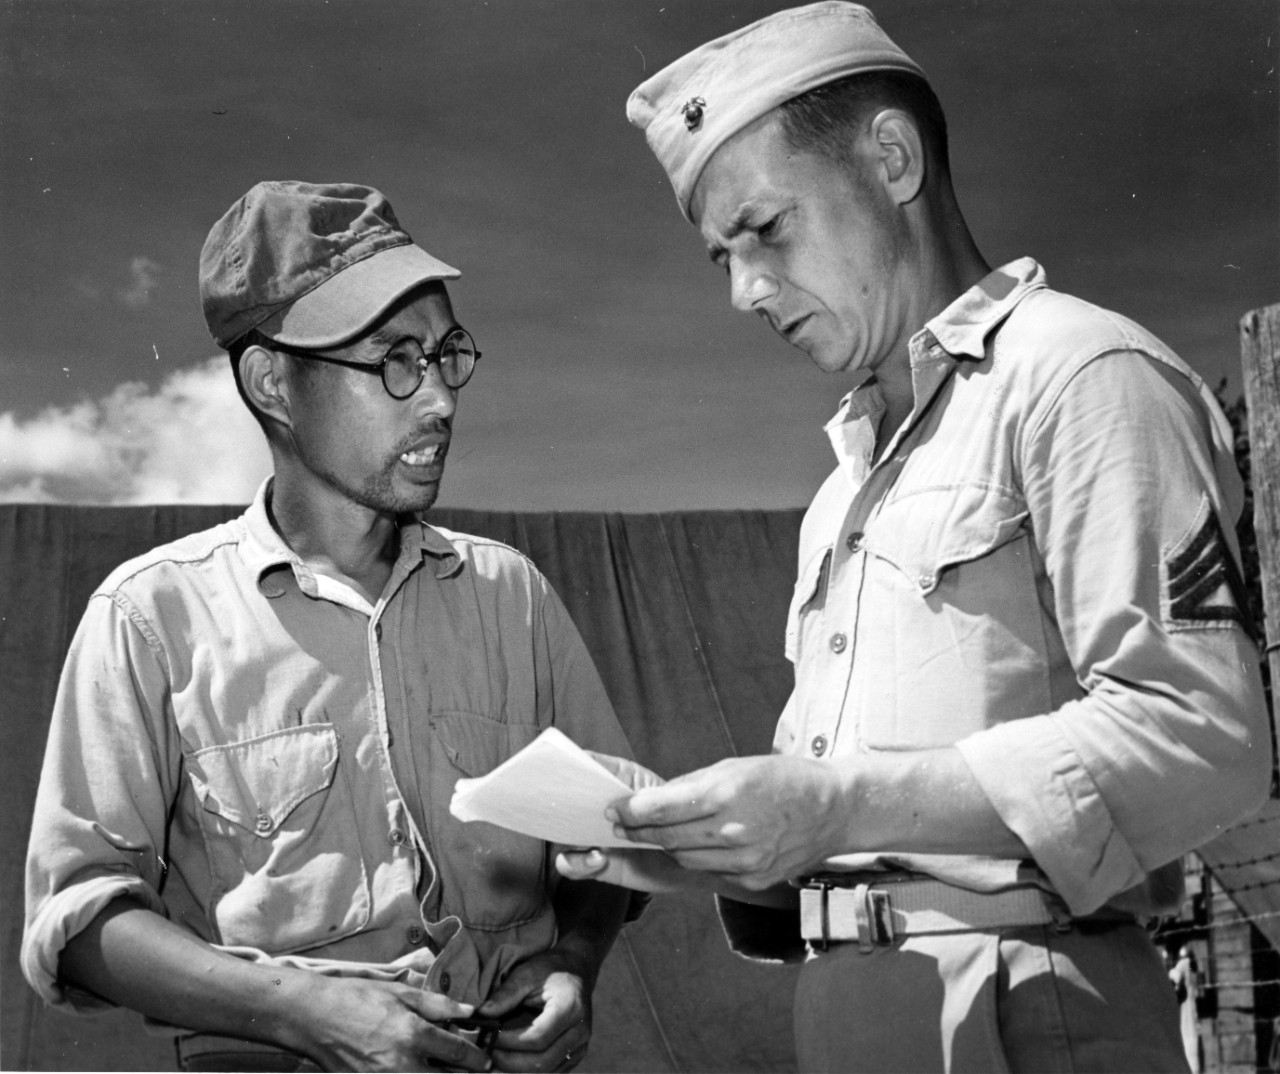 <p>L53-21.02.03 <span style="line-height: 107%; font-family: &quot;Tahoma&quot;,sans-serif; font-size: 9pt;">&quot;More Japanese Surrender As Americans Advance In The Pacific&quot;</span></p><p>&nbsp;</p><div style="left: -10000px; top: 0px; width: 9000px; height: 16px; overflow: hidden; position: absolute;"><div>&nbsp;</div></div>